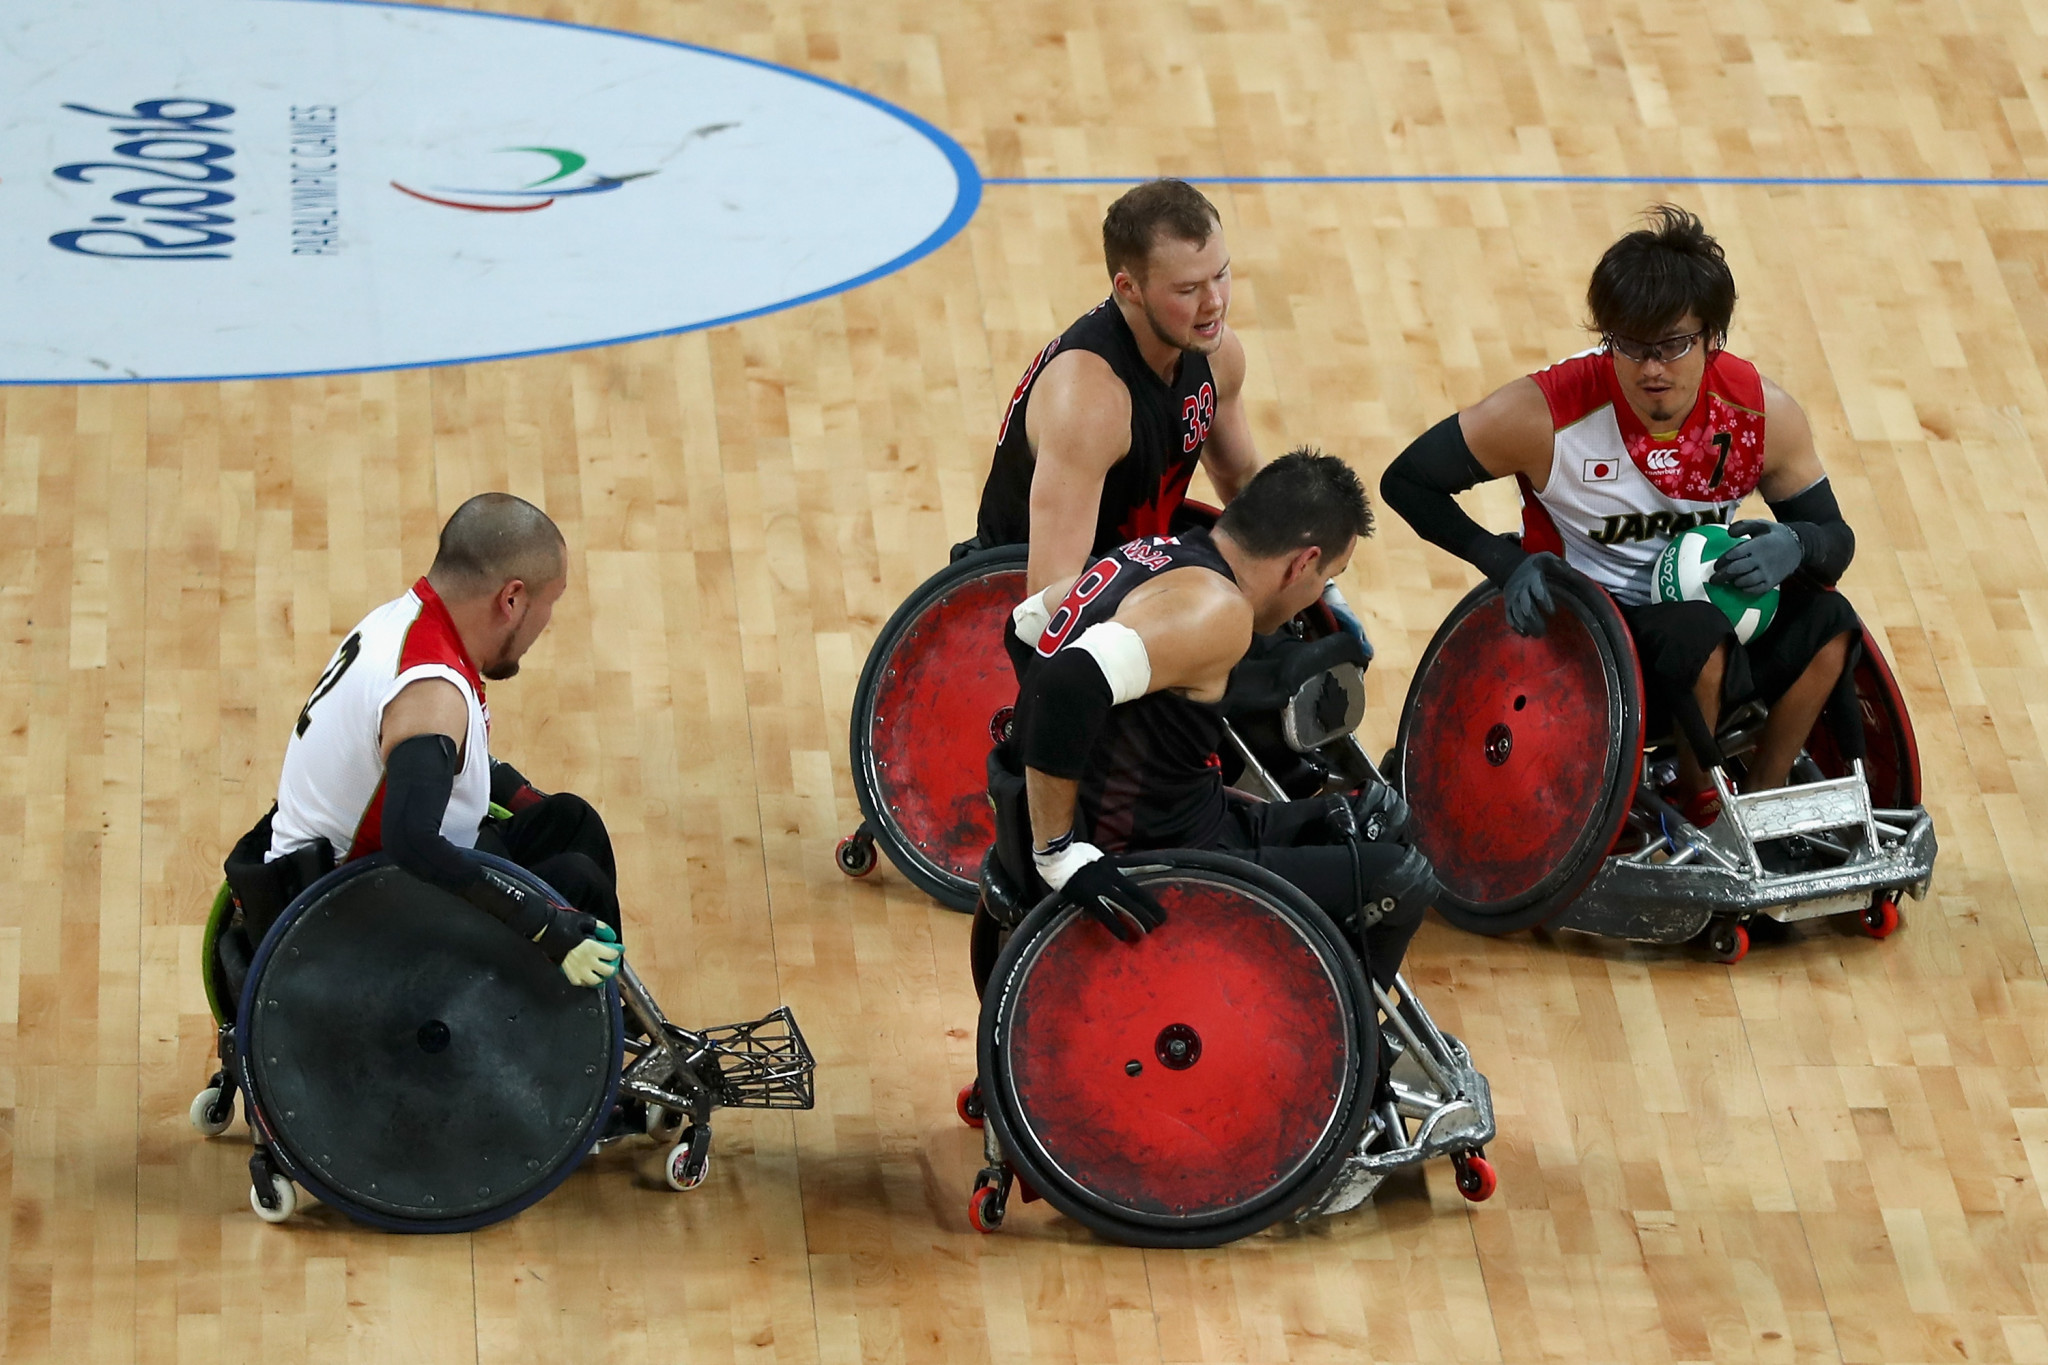 Wheelchair rugby will now look forward to the Tokyo 2020 Paralympic Games  ©Getty Images